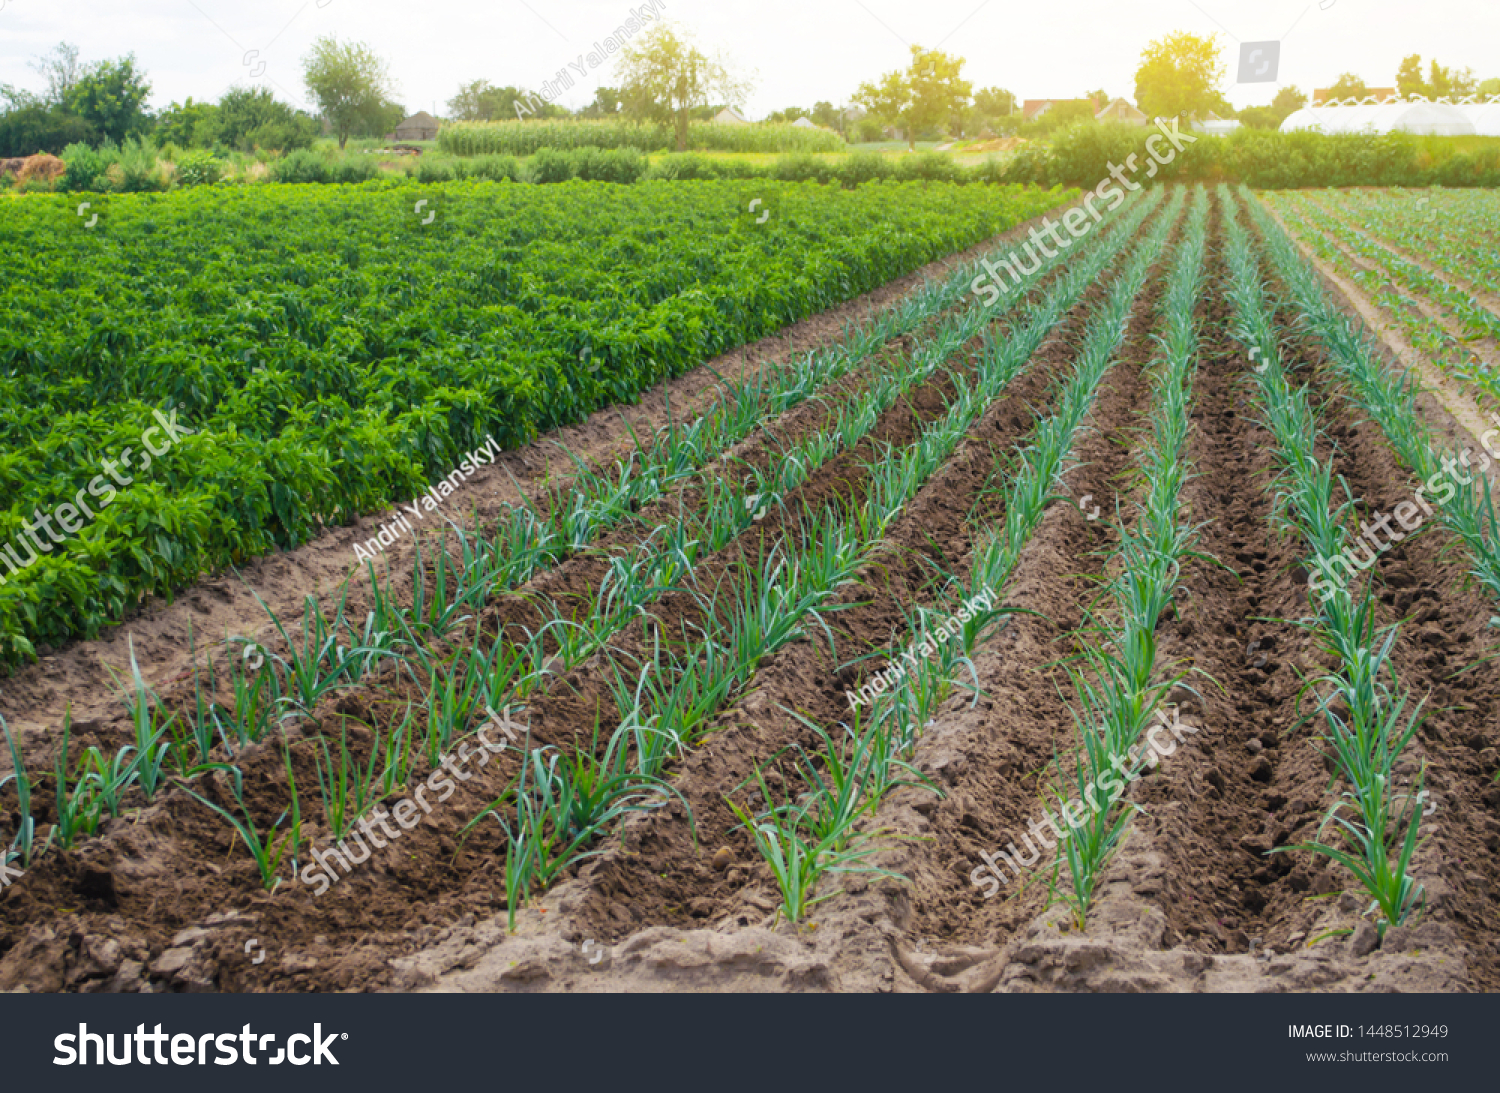 A field of young green leek plantations. Growing vegetables on the farm, harvesting for sale. Agribusiness and farming. Countryside. Cultivation and care for plantation. Improving efficiency of crop. #1448512949